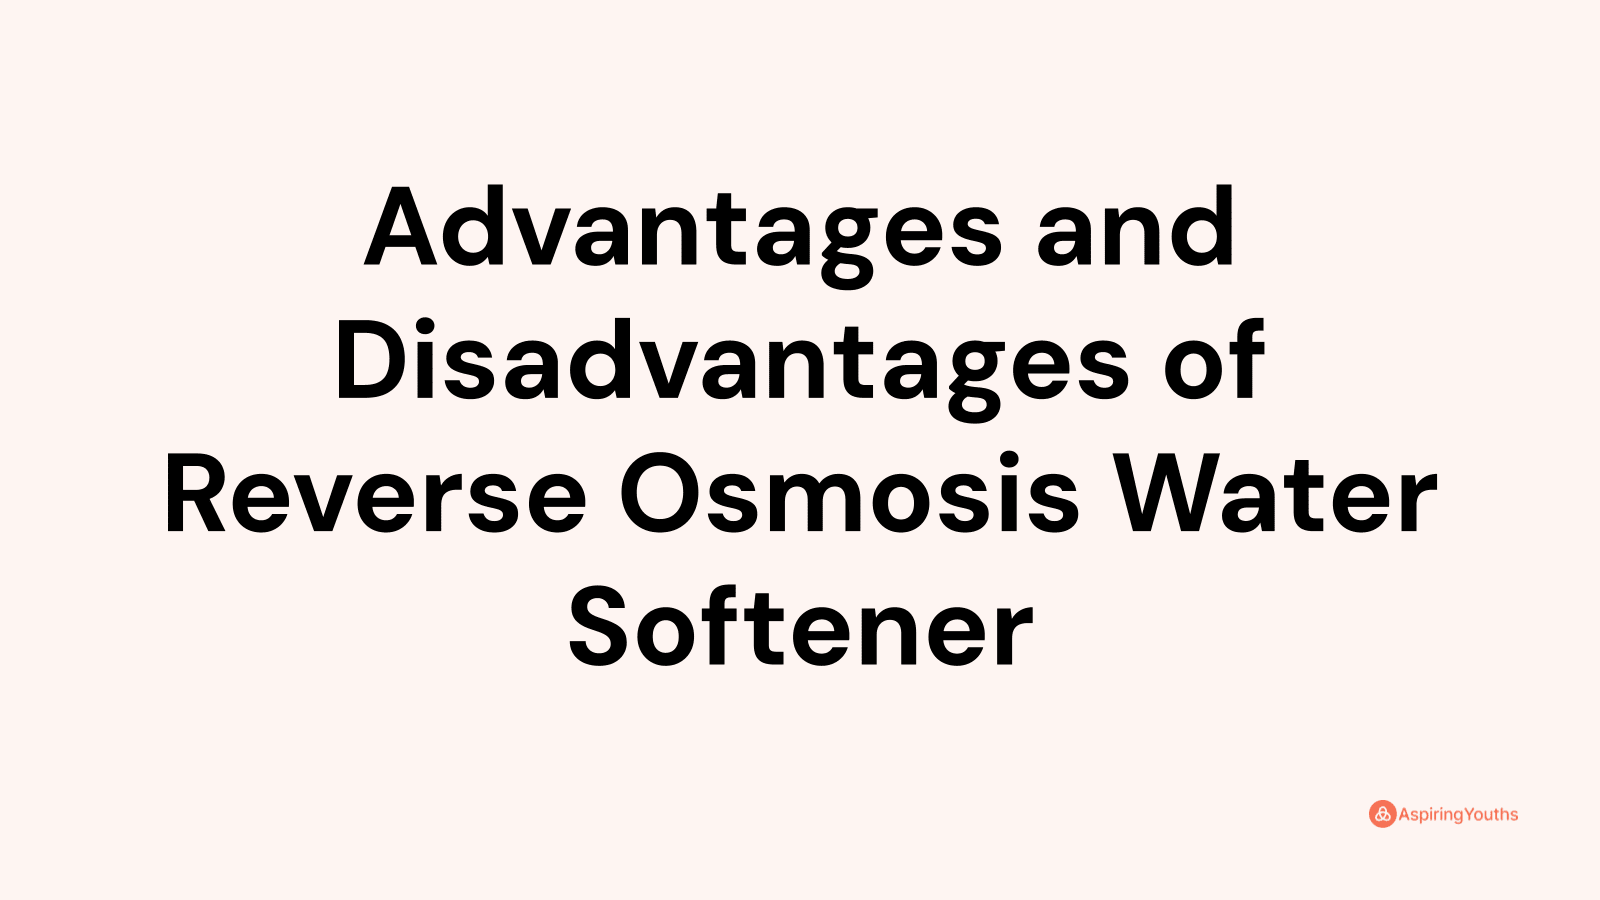 Advantages and disadvantages of Reverse Osmosis Water Softener